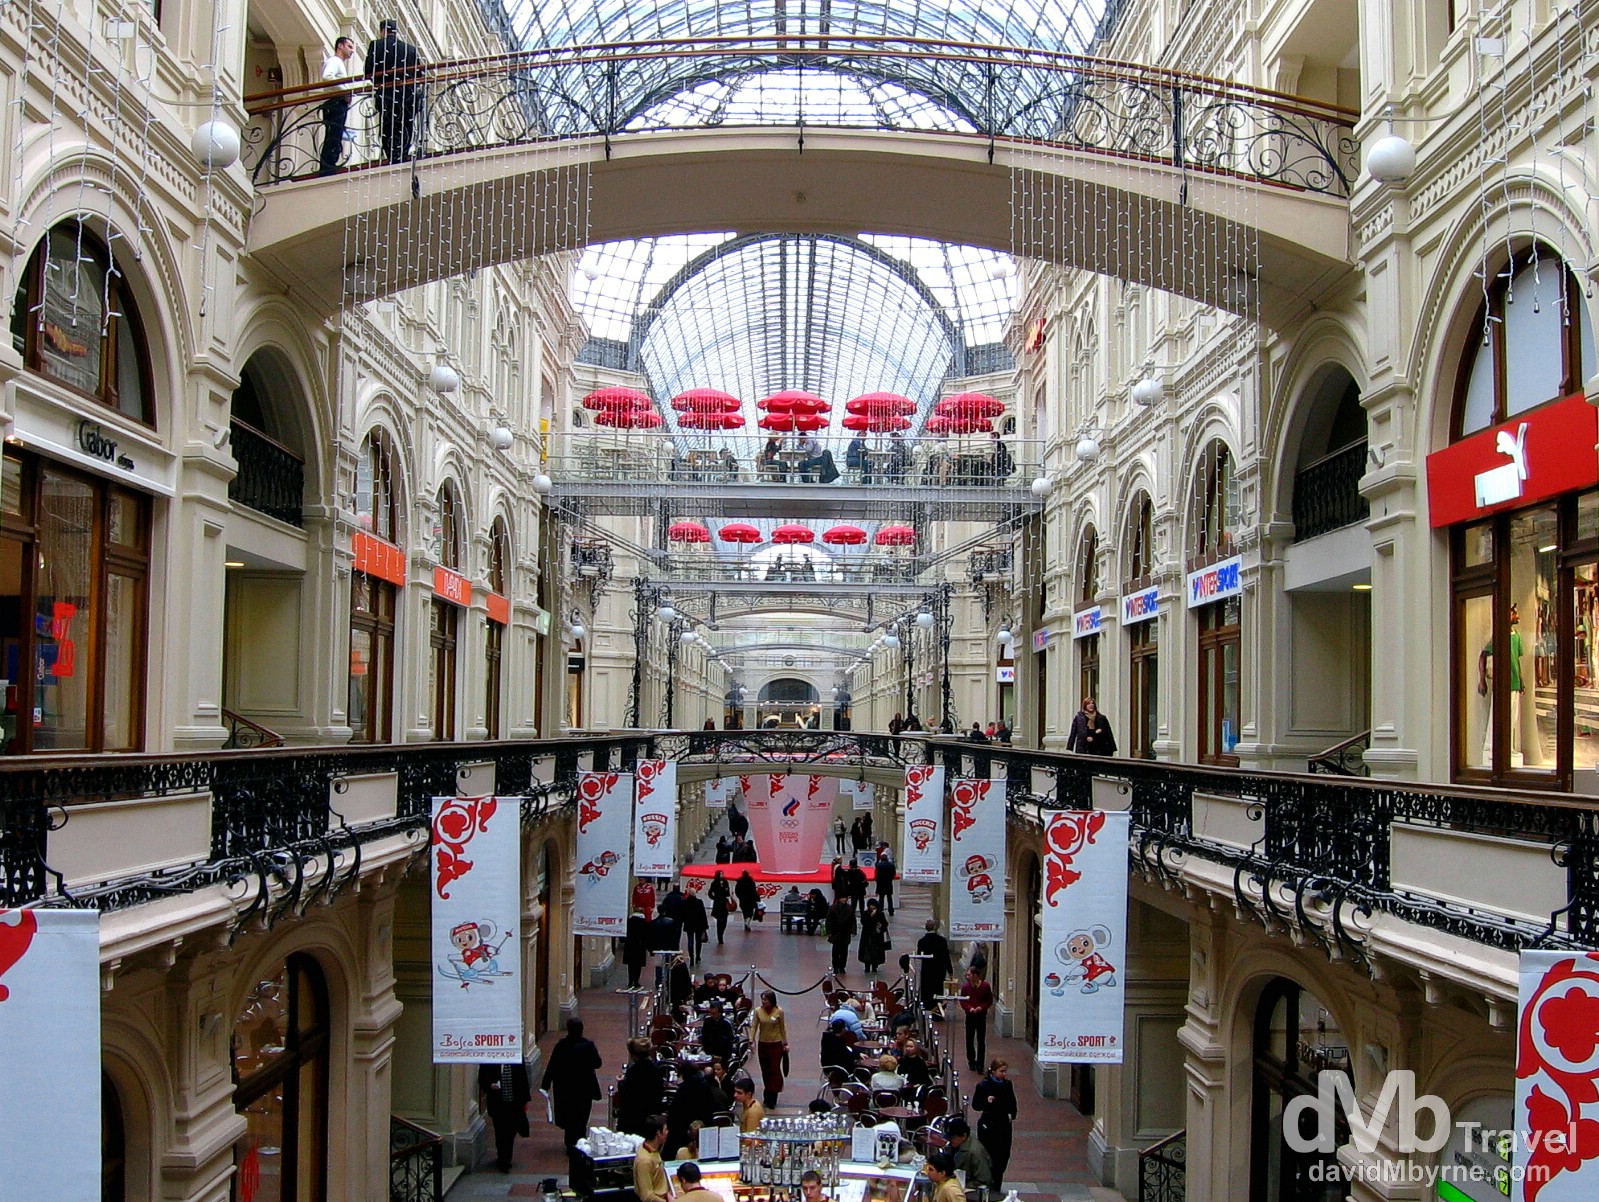 The interior of the GUM Department Store, Red Square, Moscow, Russia. February 26, 2006.